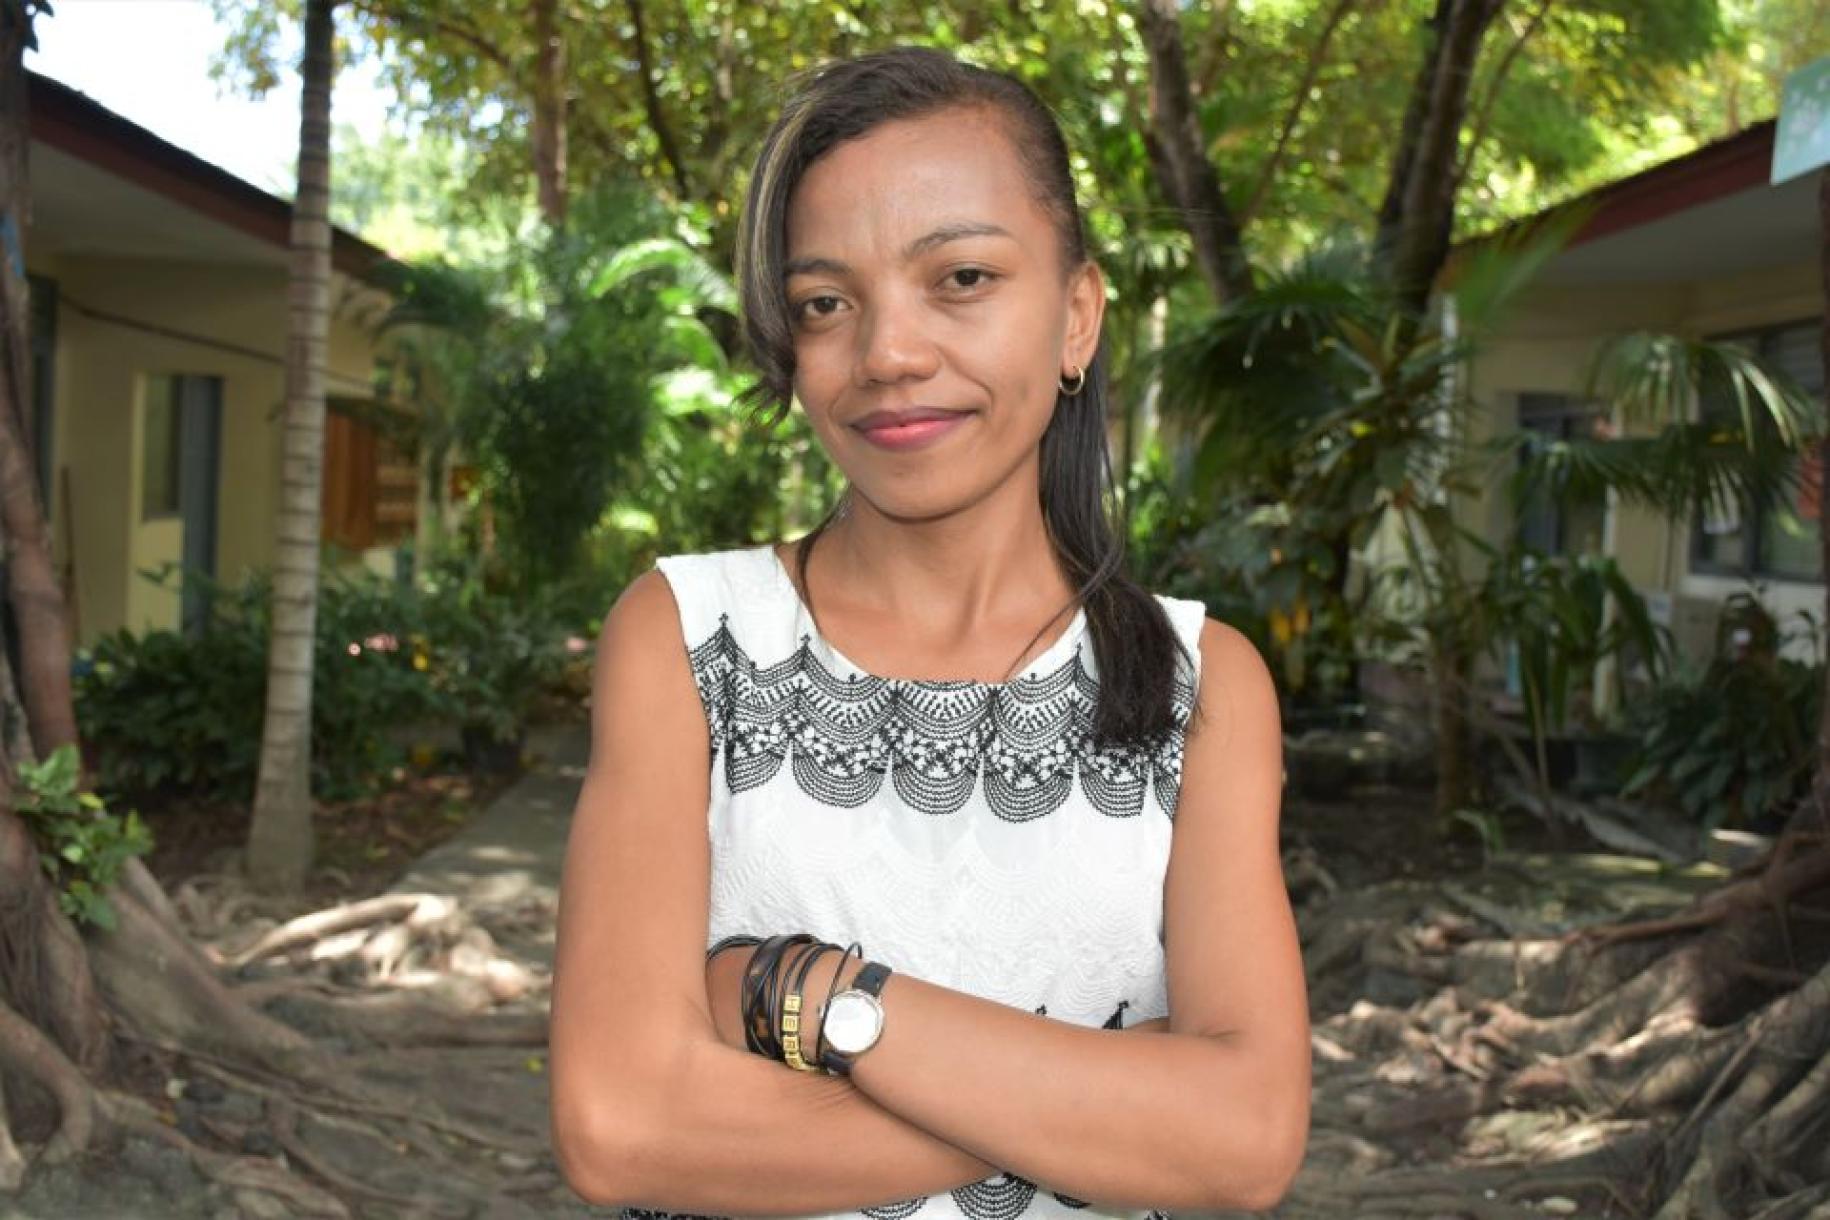 Norberta V. Soares da Cruz stands in outside in front of two homes with her arms crossed as she looks at the camera.